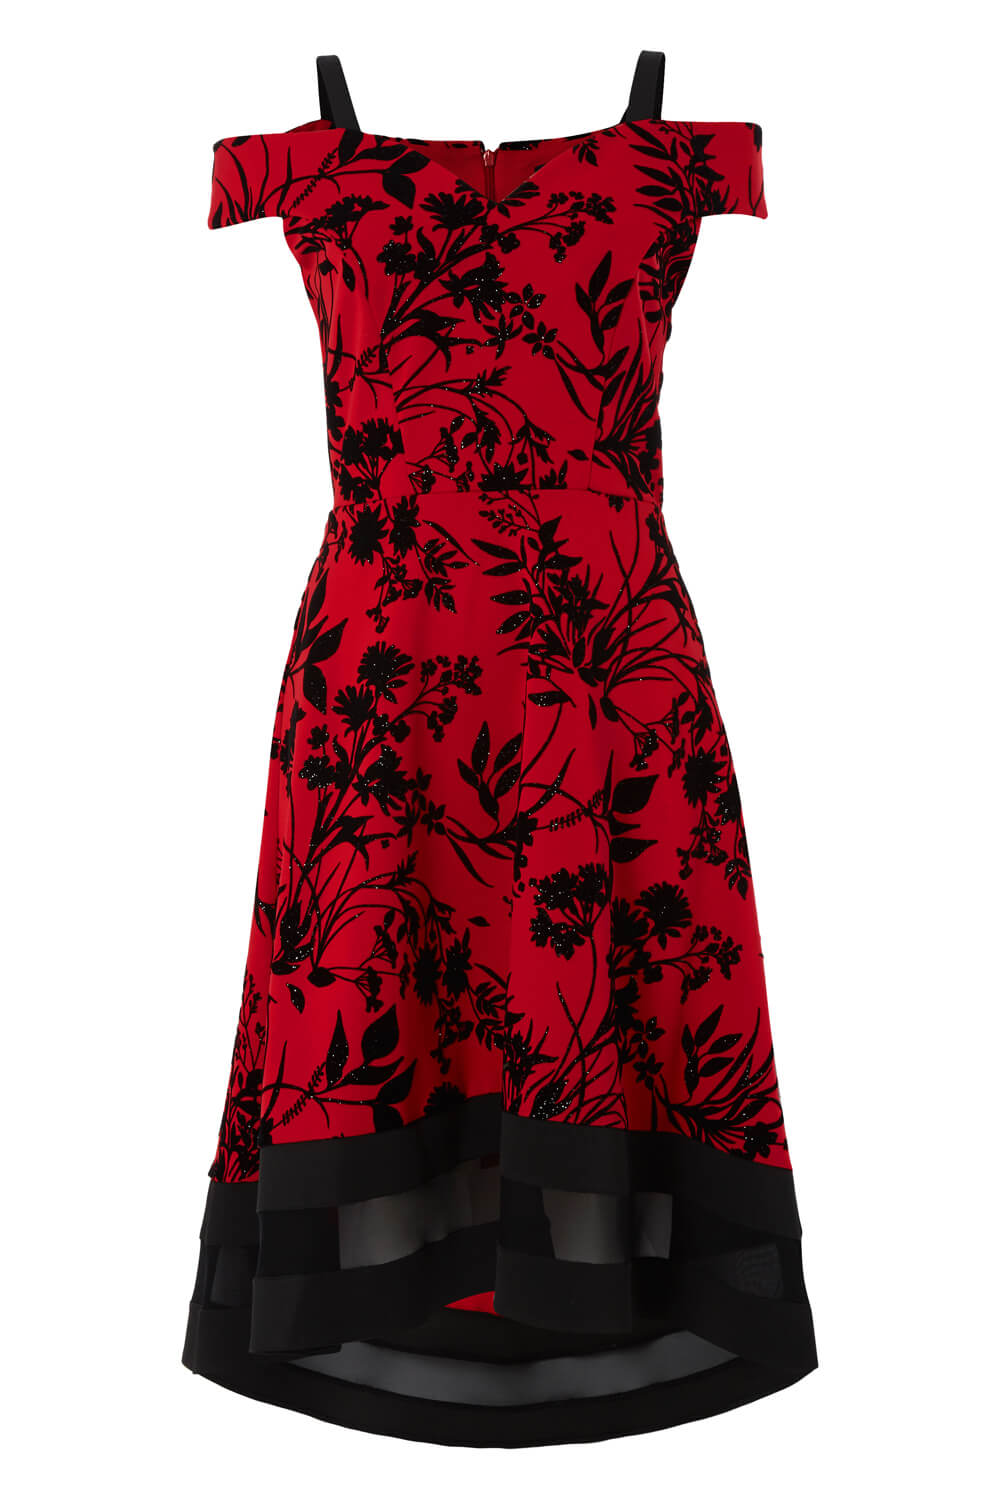 Red Luxe Stretch Flocked Cold Shoulder Dress, Image 5 of 5